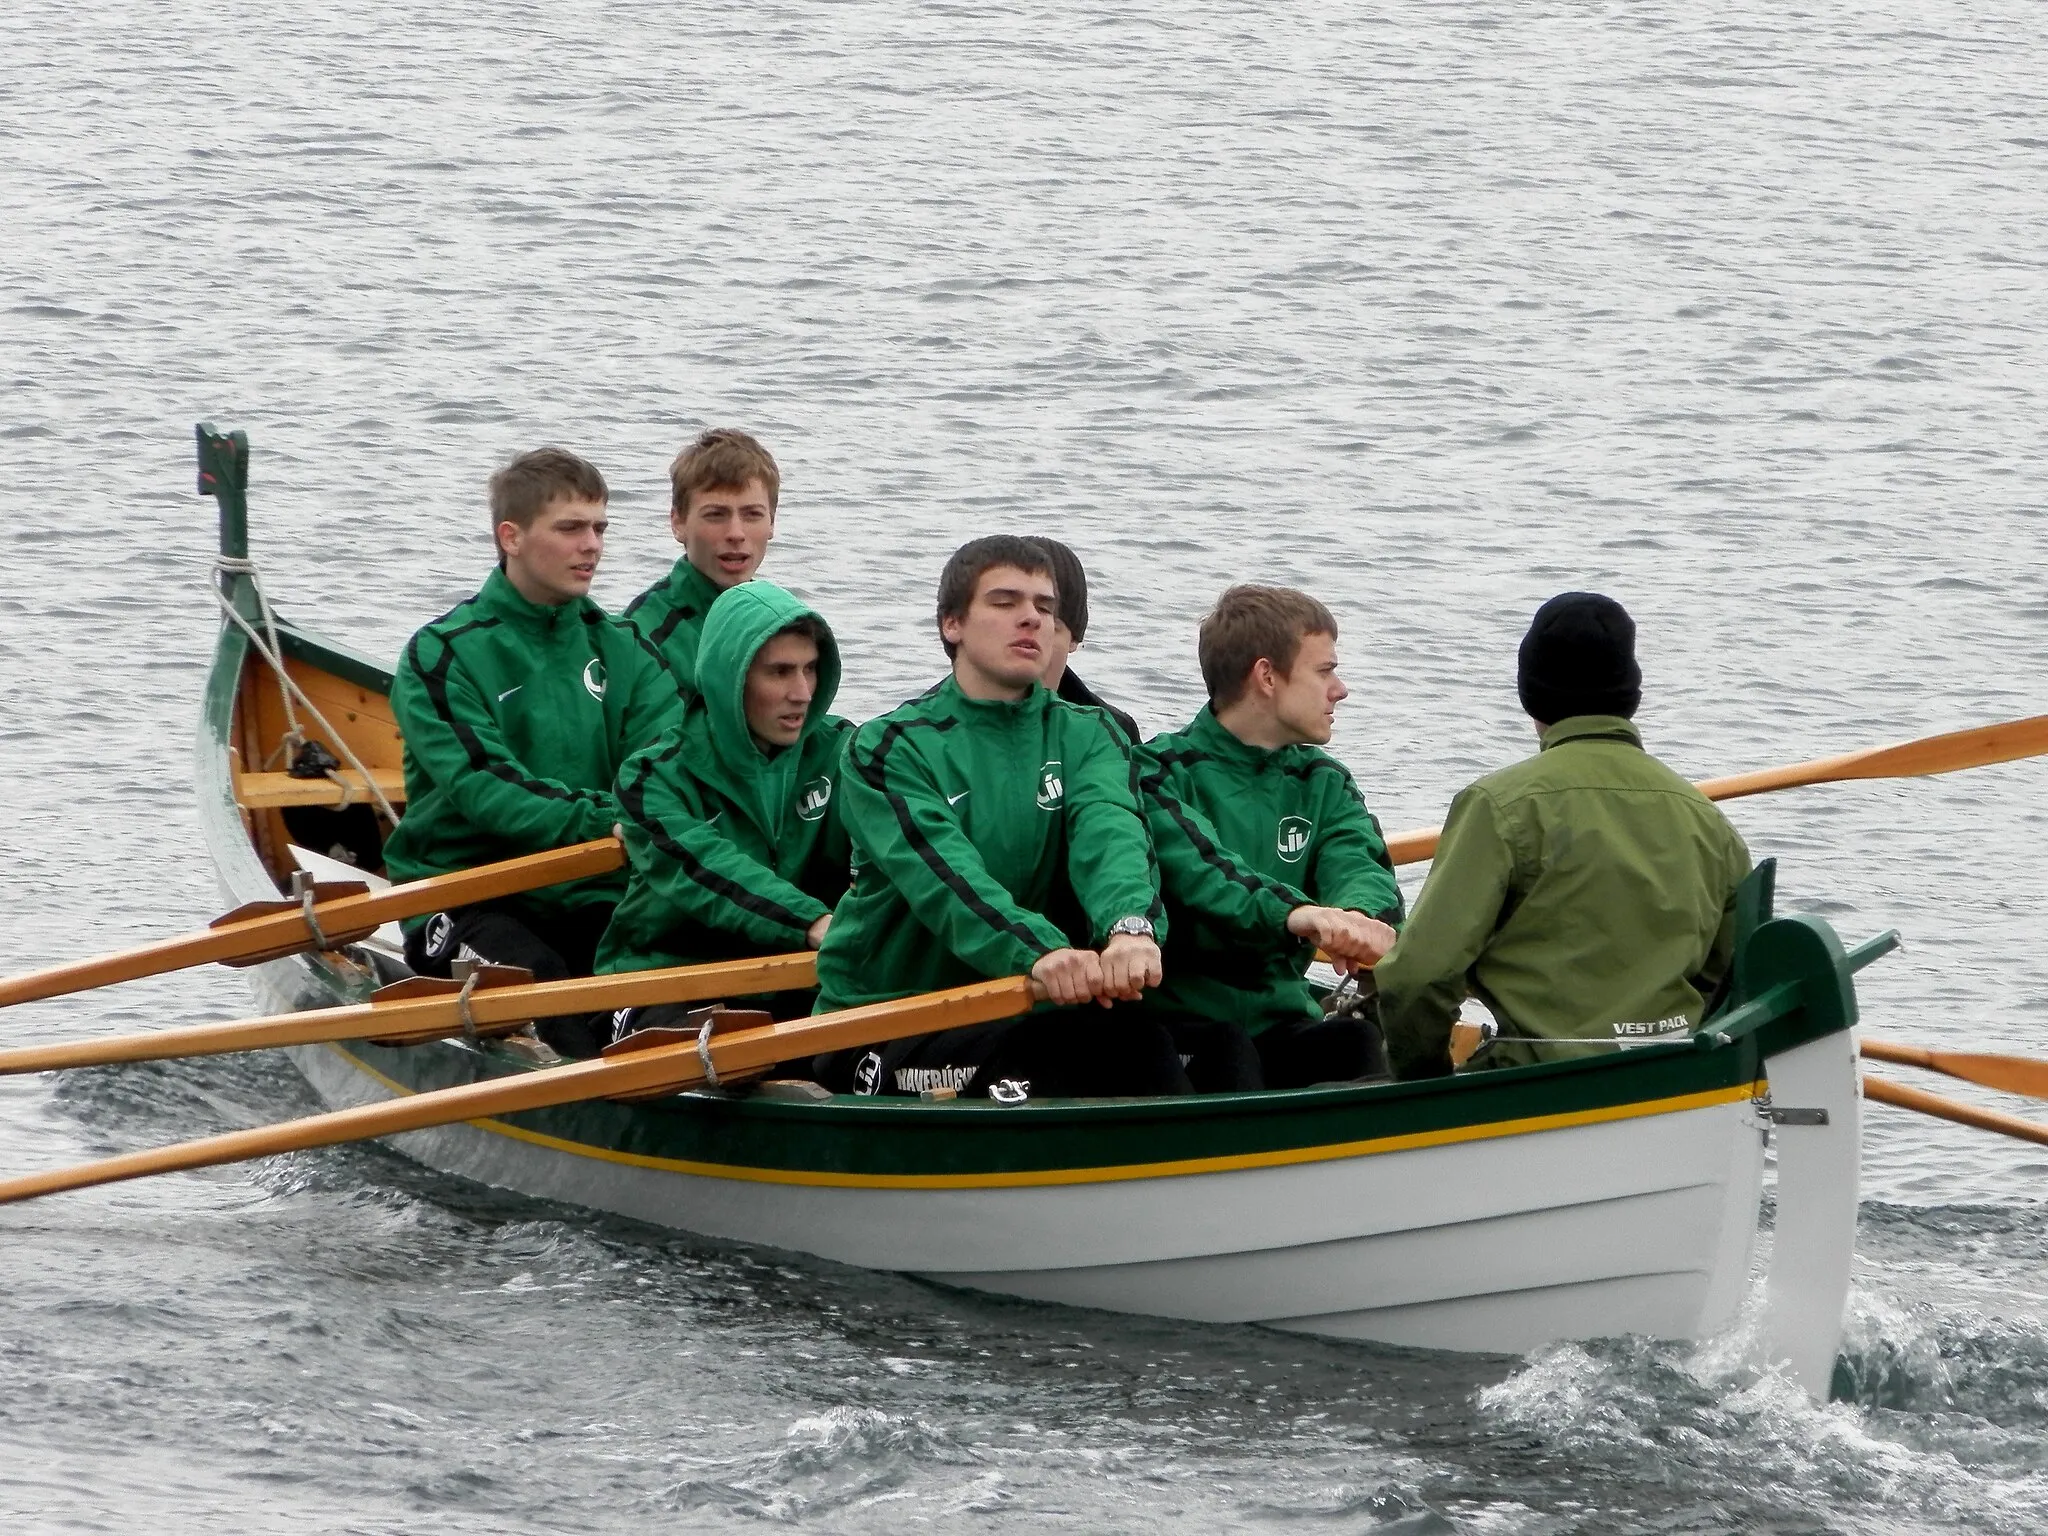 Photo showing: Havfrúgvin is a Faroese wooden rowing boat from the village Vestmanna, it is a 5-mannafar. This photo was taken on Eystanstevna in Runavík, Faroe Islands. They are on their way out to the start here. The rowing competitions in the Faroe Islands are on the sea, in fjords or sounds. There are 7 competitions in June and July. There are winners for every competition and there are final winners of the the races, they will be Faroese Champions. There are 9 categories in the Faroese Championship: Children, boys under 15, in 5-mannafør, children, girls under 15, in 5-mannafør, 5-mannafør boys under 18, 5-mannafør girls under 18, 5-mannafør women, 6-mannafør men, 6-mannafør women, 8-mannafør men and 10-mannafør men. A 5-mannafar is the smallest boat type, it is for 6 rowers, and a 10-mannafar is the largest boat type, for 10 rowers. One of the rowers in this boat, Torstein Brattaberg, is also competing in indoor rowing. He won the Danish Junior Championship in 2011 and 2012 and the Nordic Junior Championship in 2000 meter indoor rowing for boys 15-16.